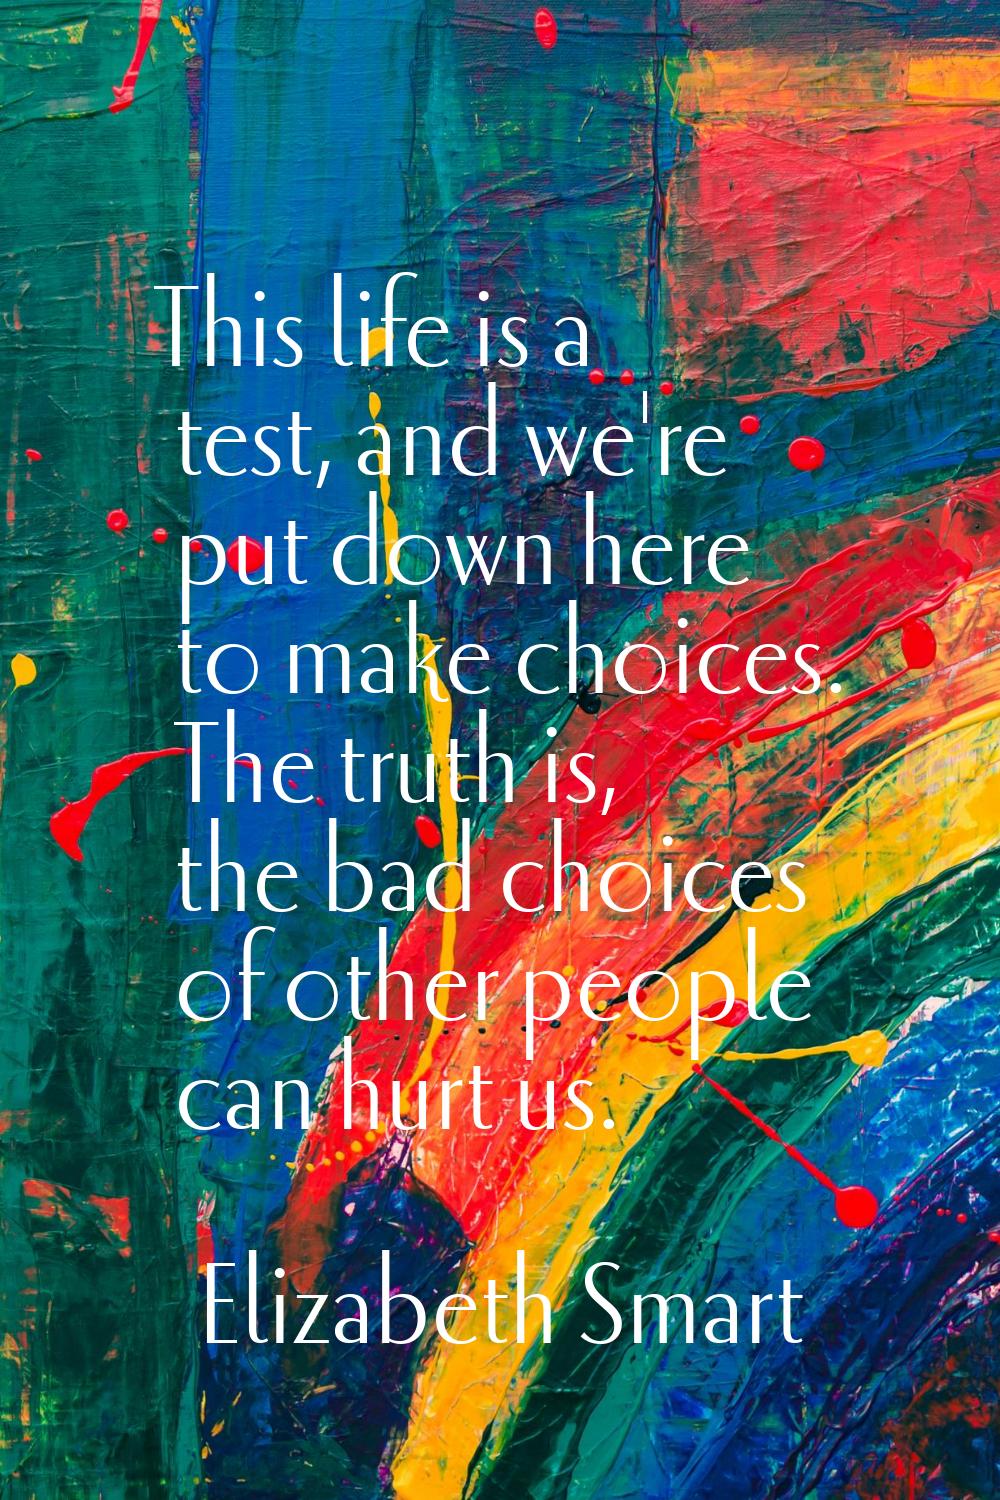 This life is a test, and we're put down here to make choices. The truth is, the bad choices of othe